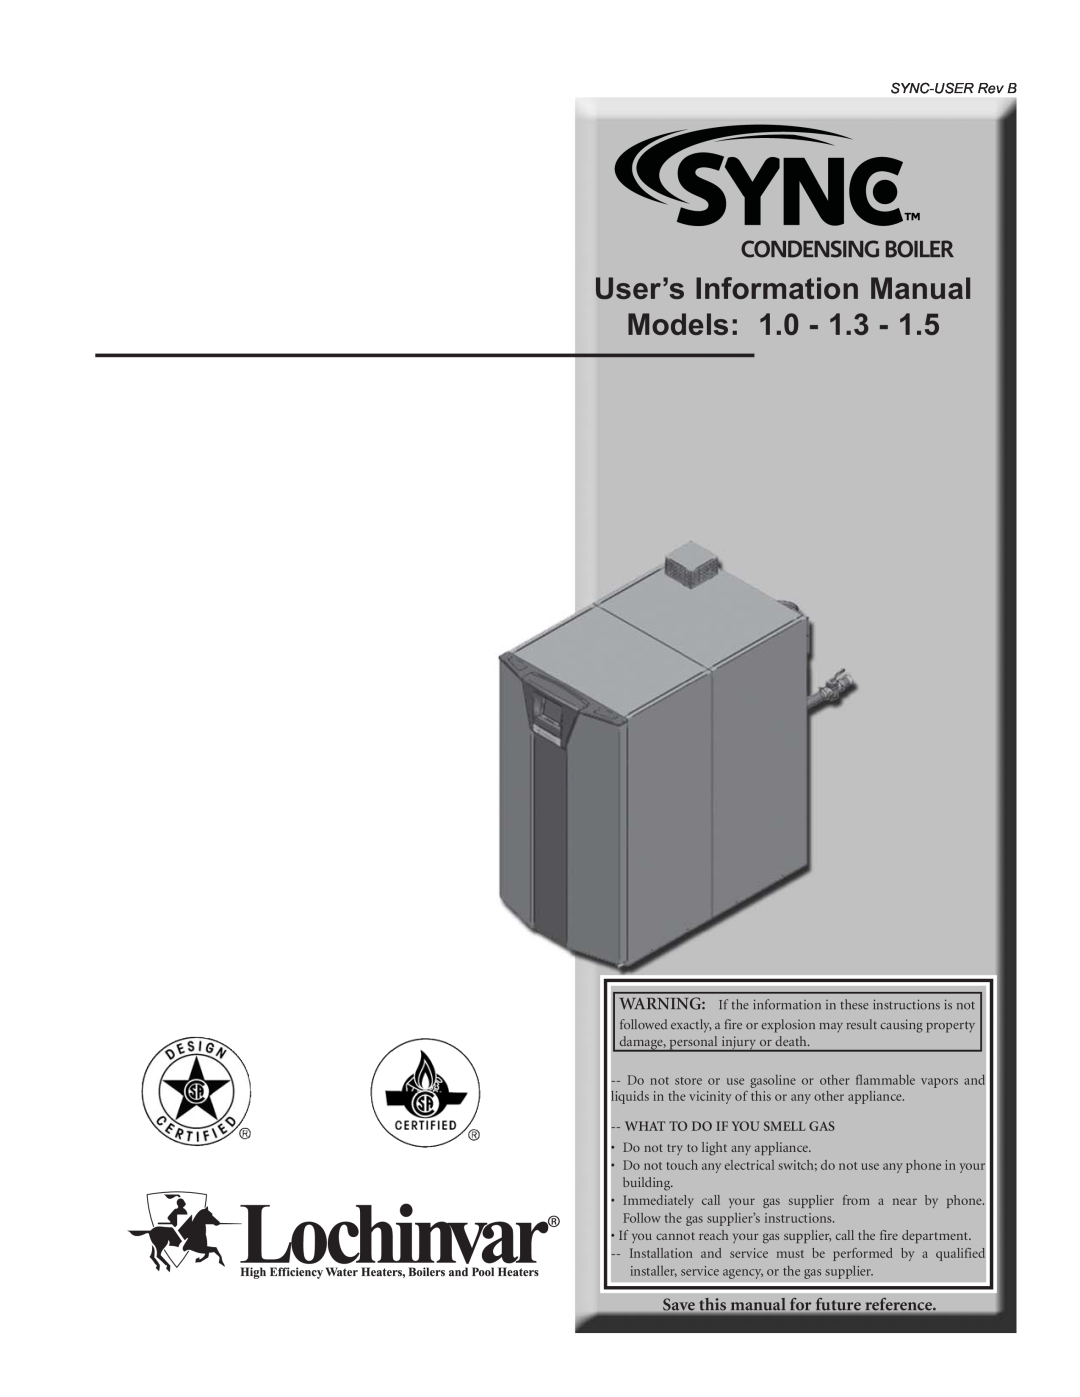 Lochinvar 1.3, 1.5 operation manual Models, SYNC - PCP Rev A, Save this manual for future reference 